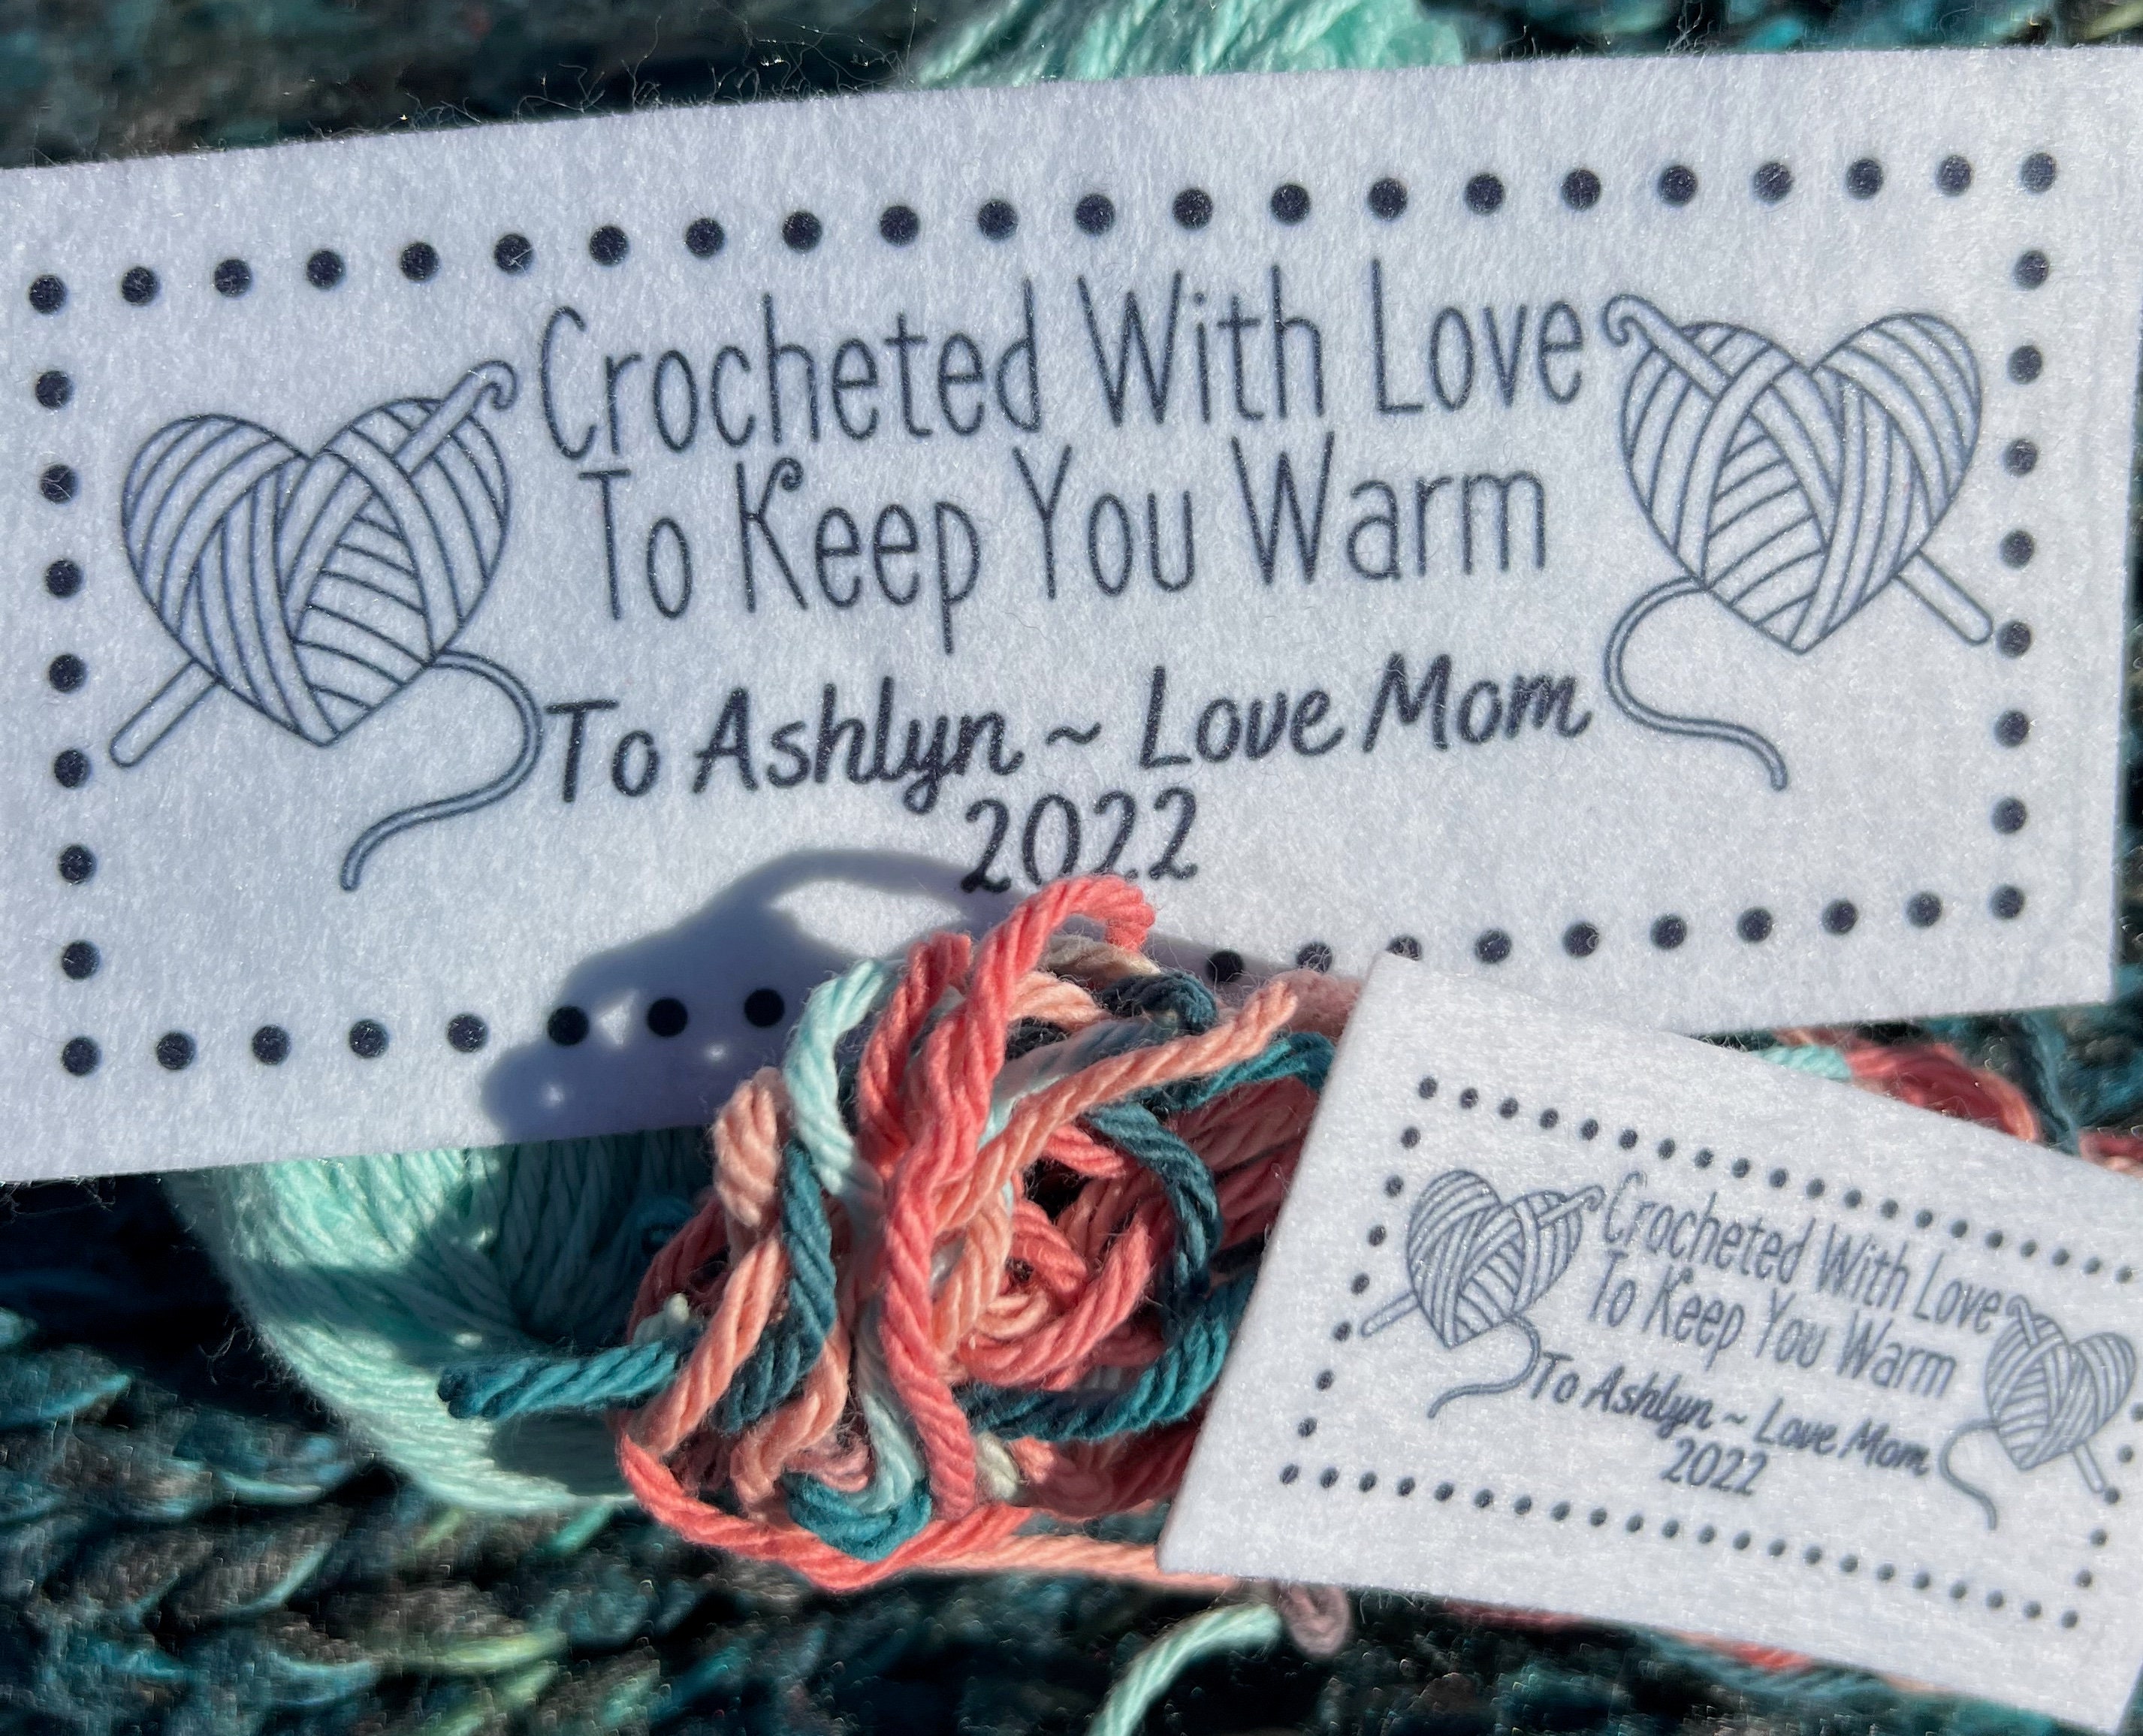 Christmas Gift Tags for Holiday Handmade Gifts, Knit, Crochet Beanies,  Cookie Mix Gifts, Amaryllis Bulb Kit, Knit Wreath Tags, Care Tags 